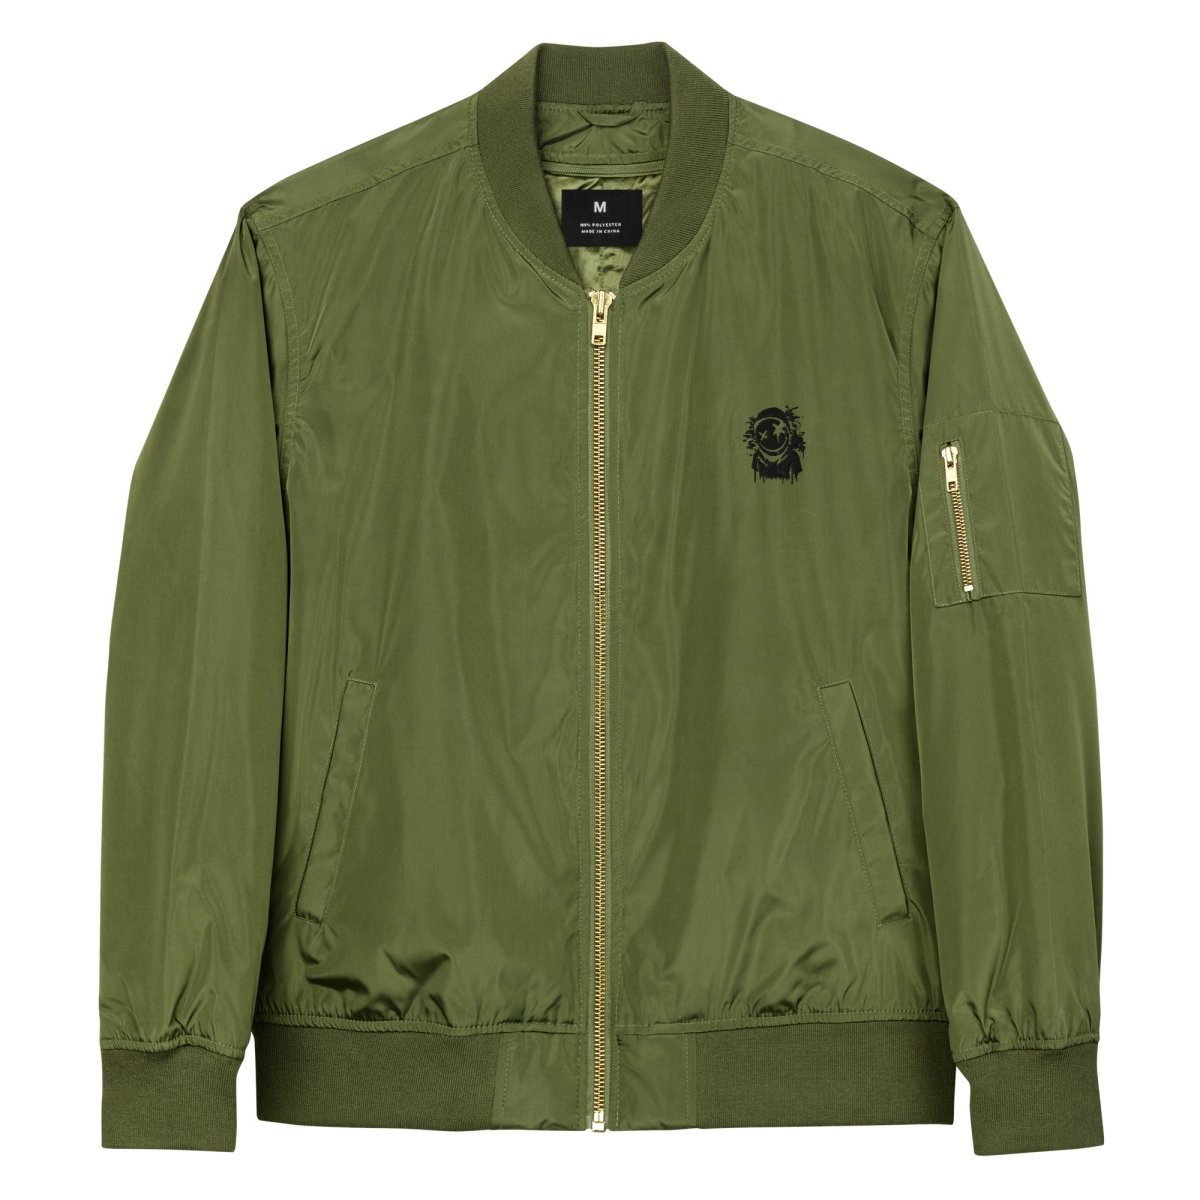 MH Classic Bomber Jacket Army - Mainly High